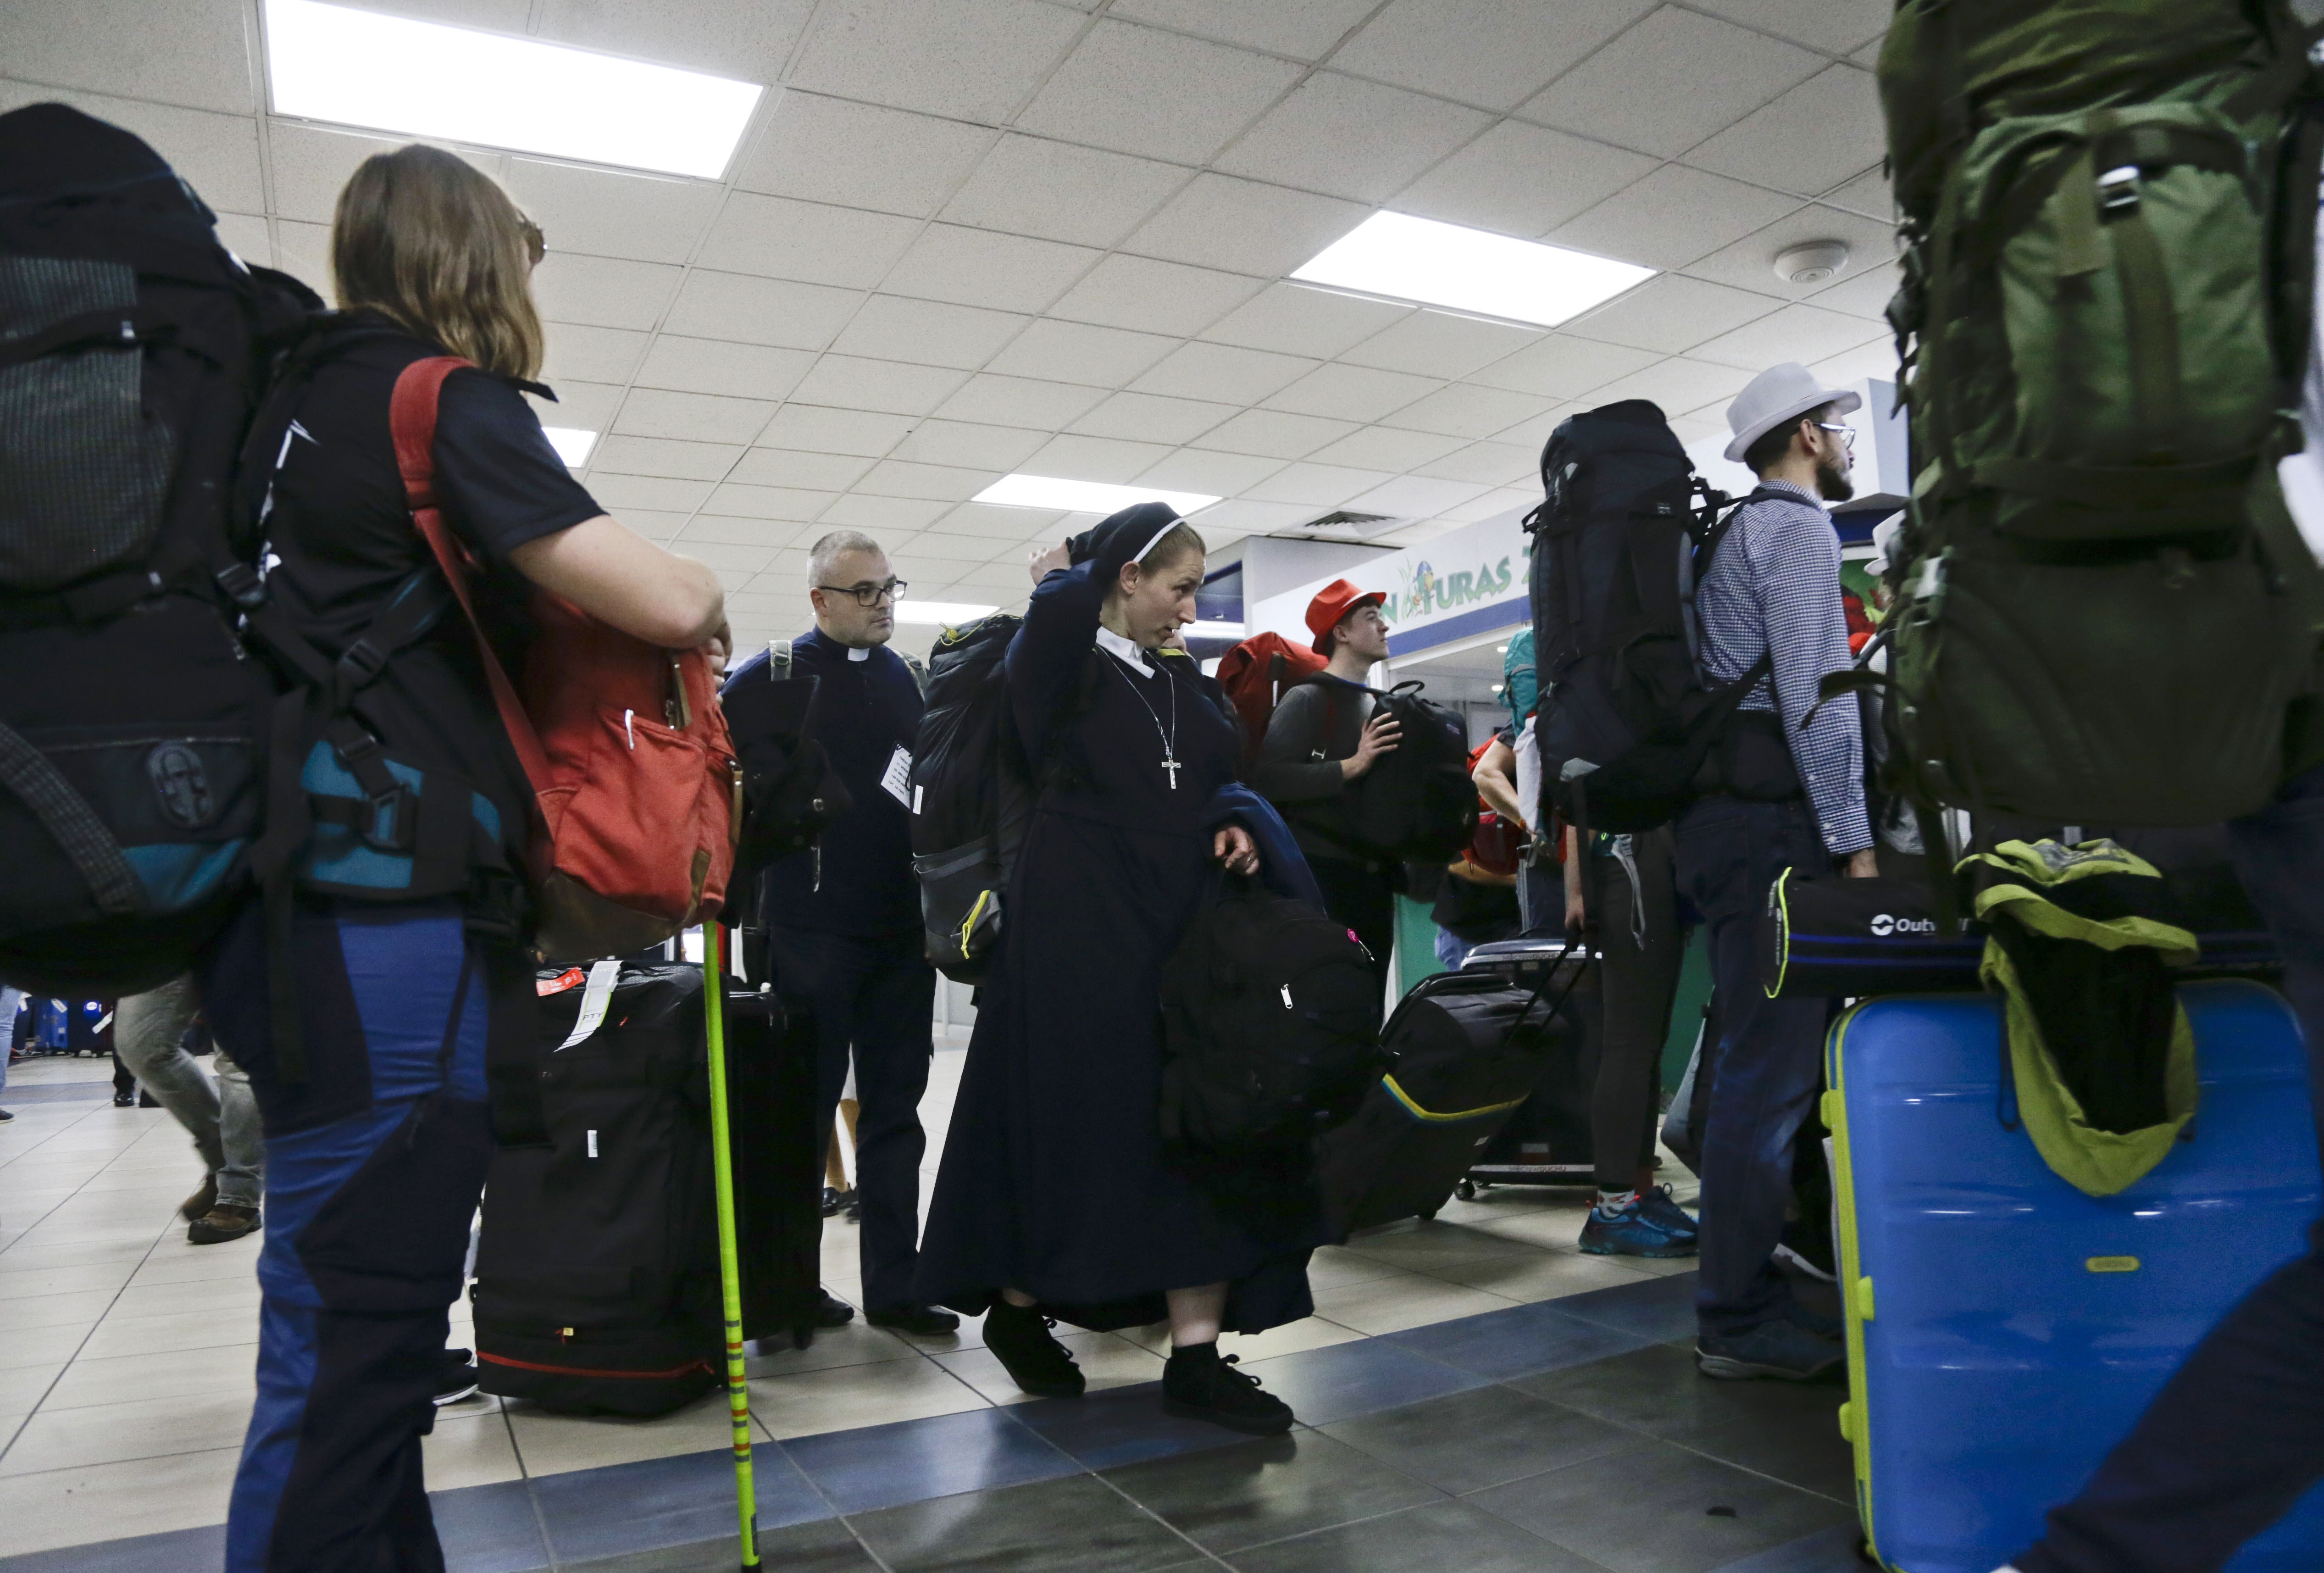 A priest and a nuns walk between a group of pilgrims from Poland while arrive to Tocumen international airport in Panama City, Monday, Jan. 14, 2019. Pilgrims from around the world are arriving to Panama form open of the World Youth Day, a major gathering of Catholics that will be joined by Pope Francis on Jan. 23-27. (AP Photo/Arnulfo Franco)